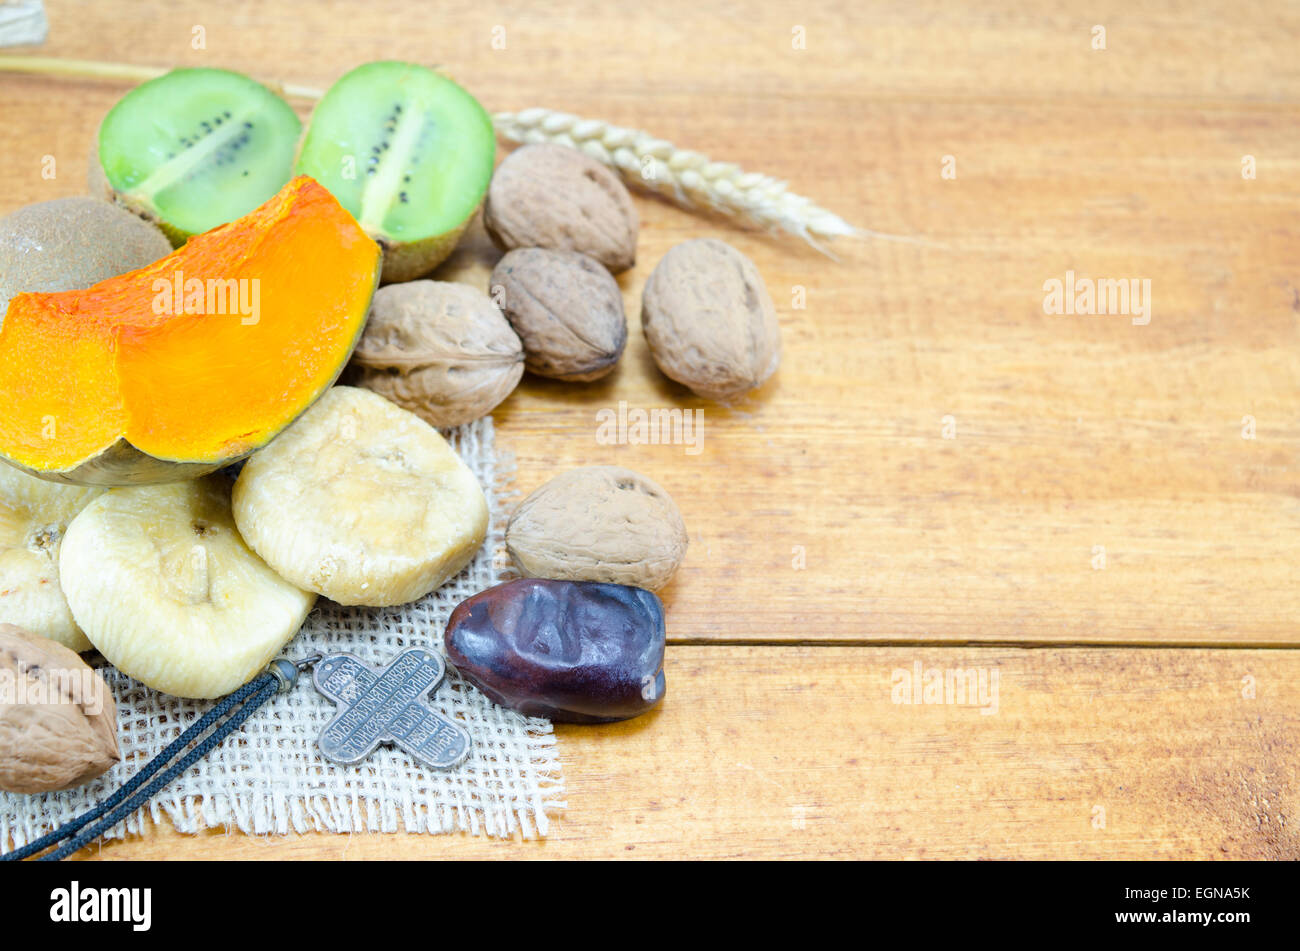 Orthodox Christmas offerings including pumpkin, figs, walnuts and wheat Stock Photo